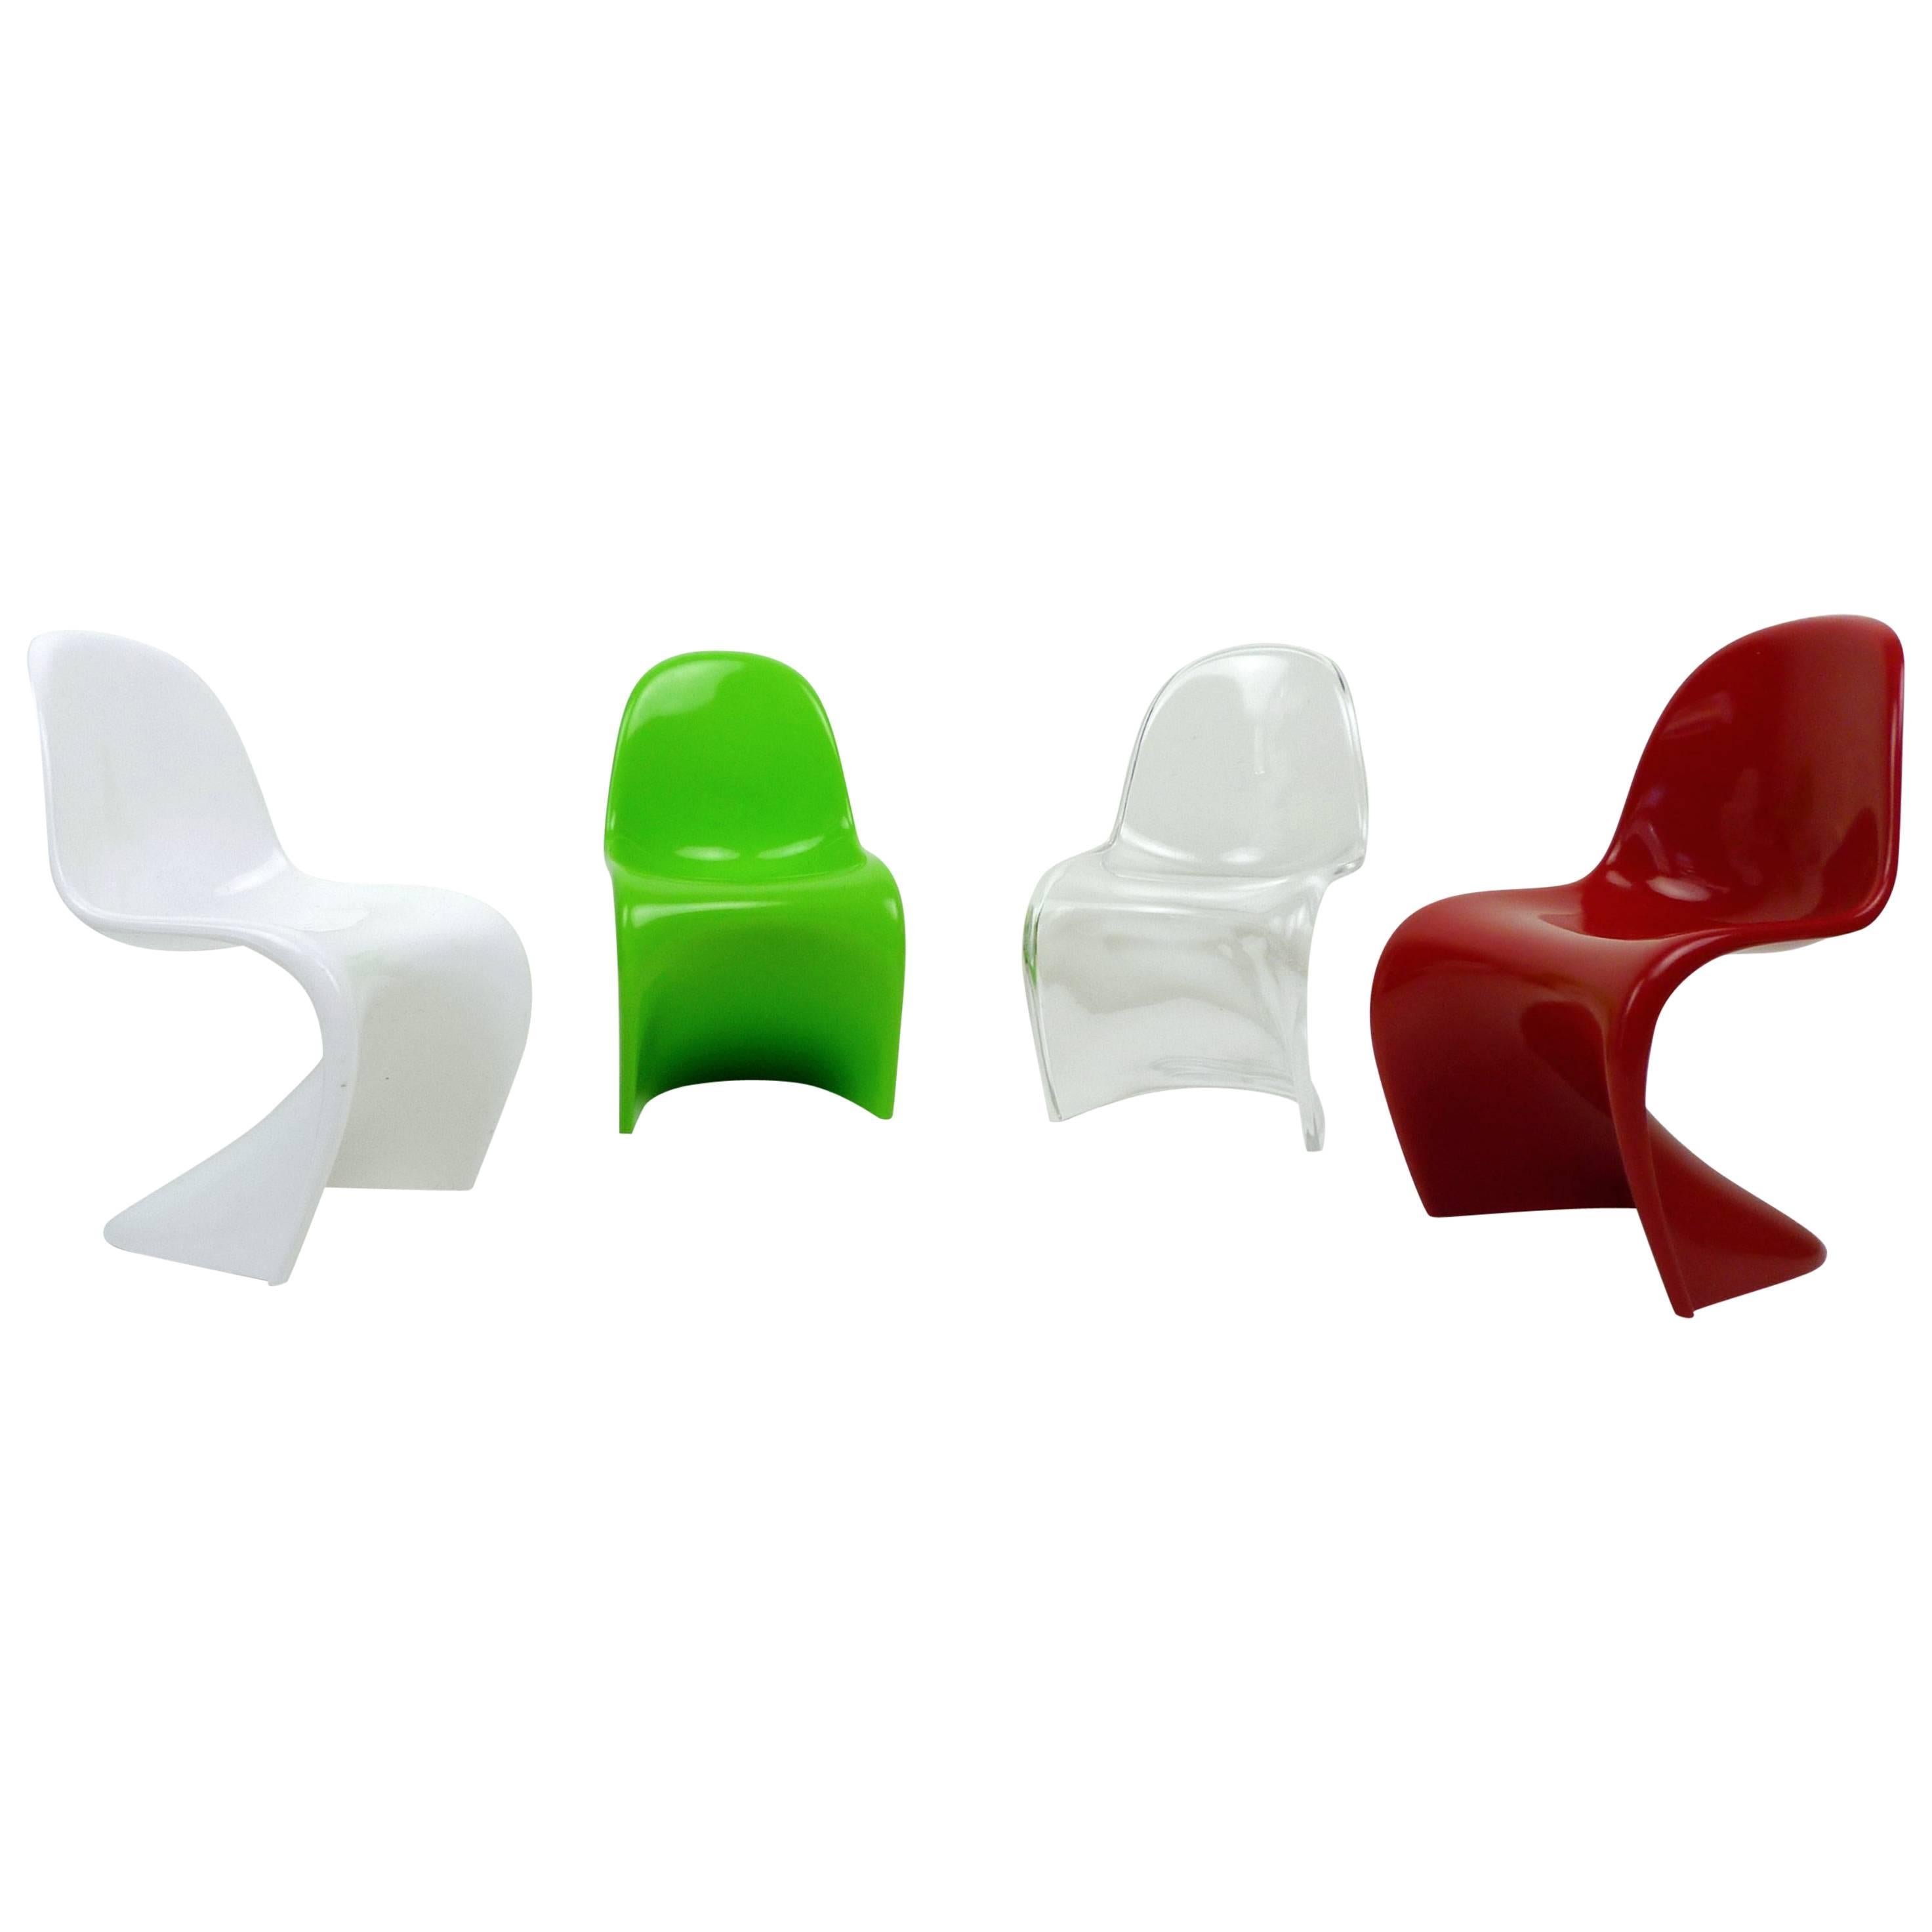 Set of Four Miniature Panton Chairs from Germany, 1970s For Sale